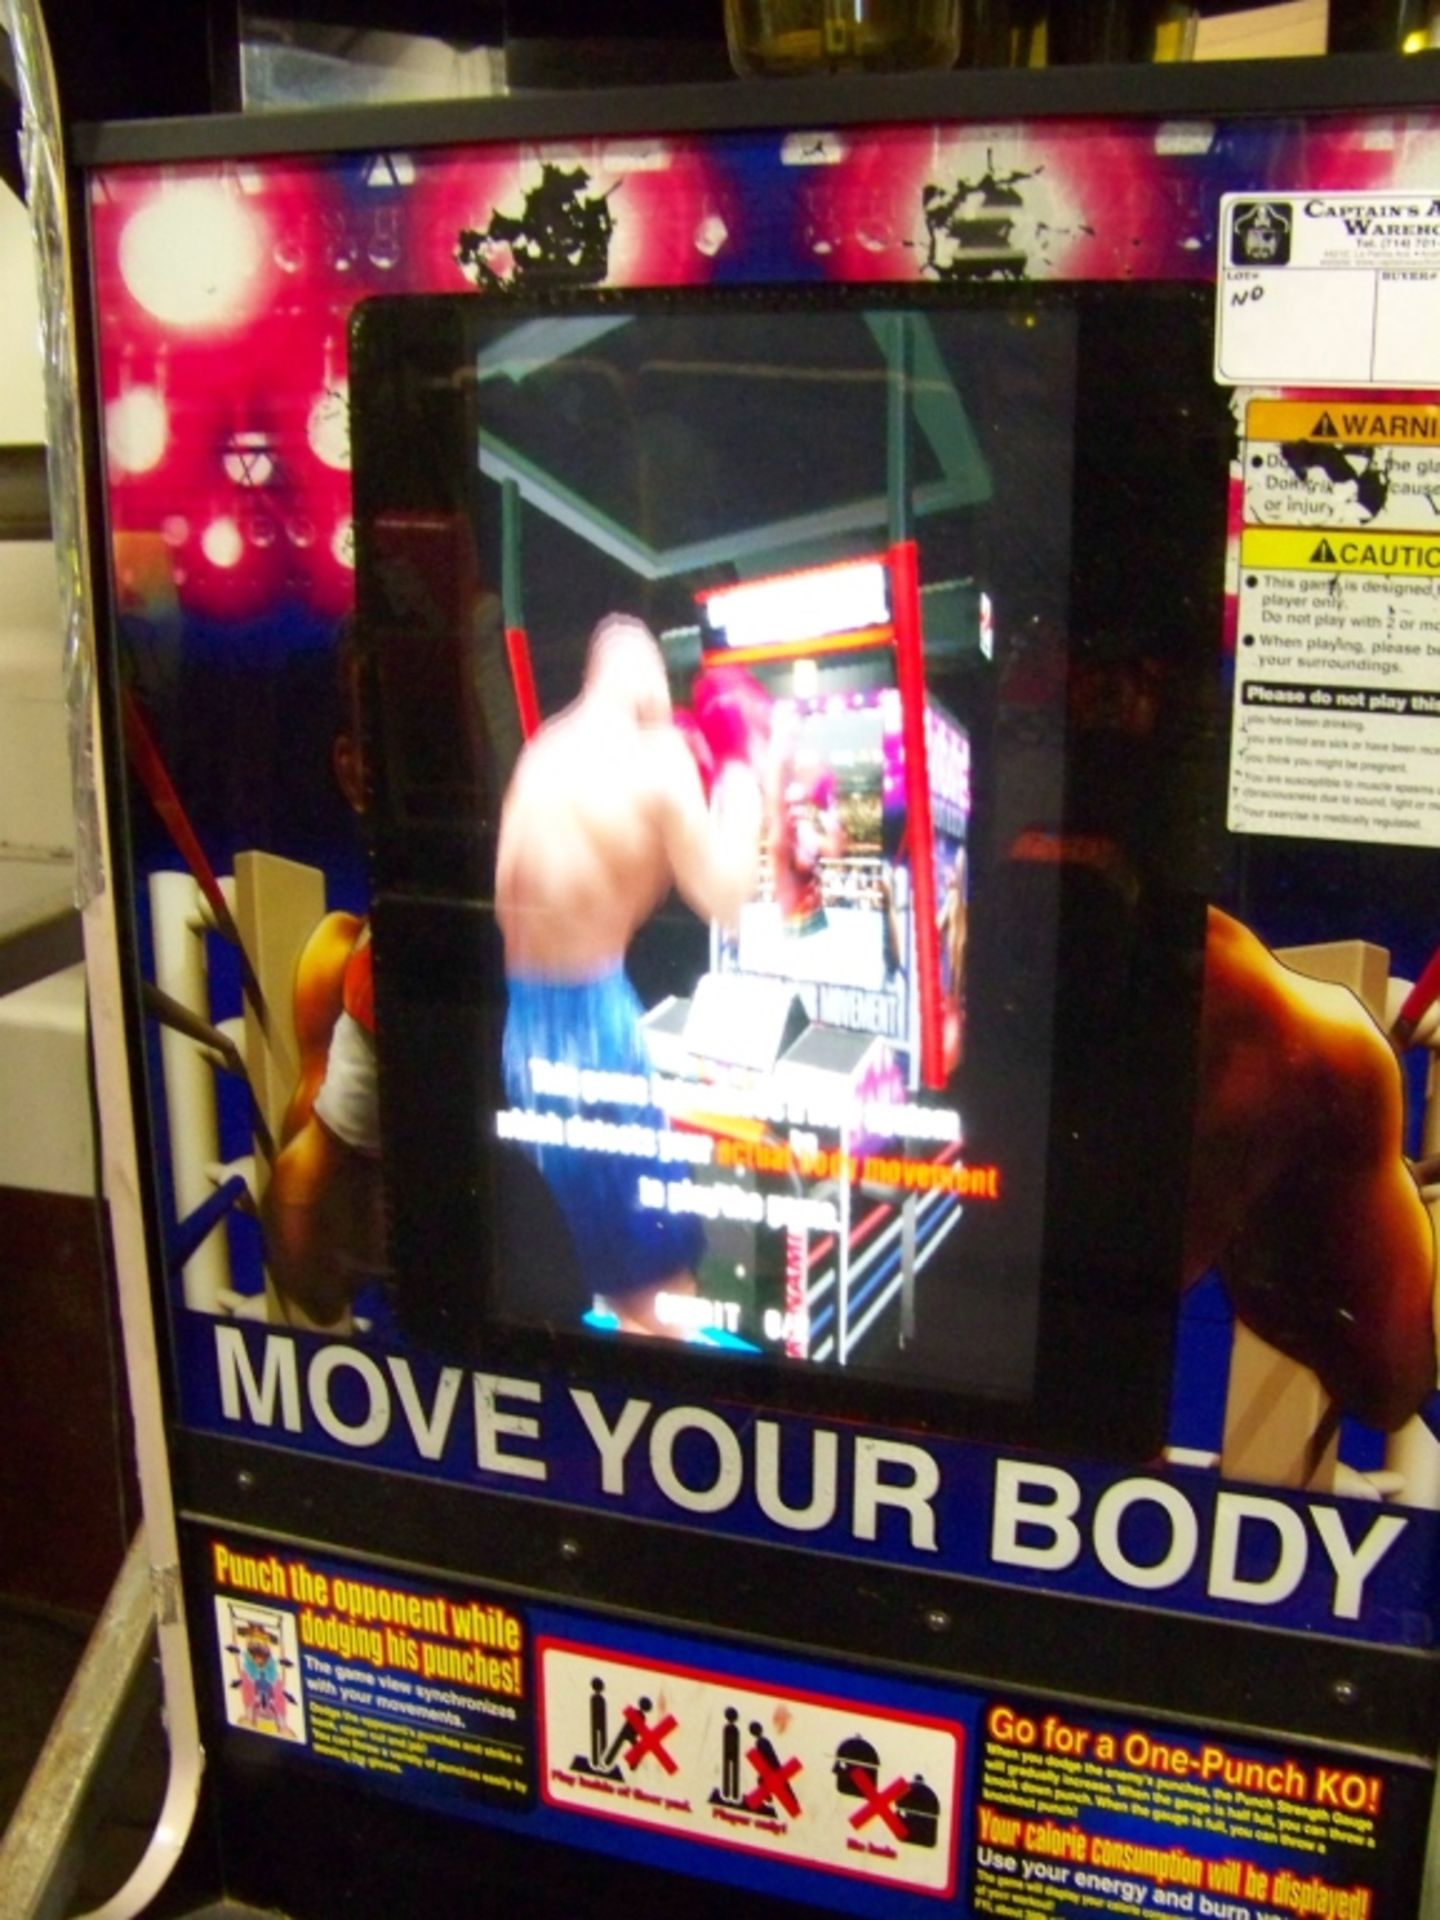 MOCAP BOXING SPORTS ARCADE GAME KONAMI Item is in used condition. Evidence of wear and commercial - Image 4 of 7